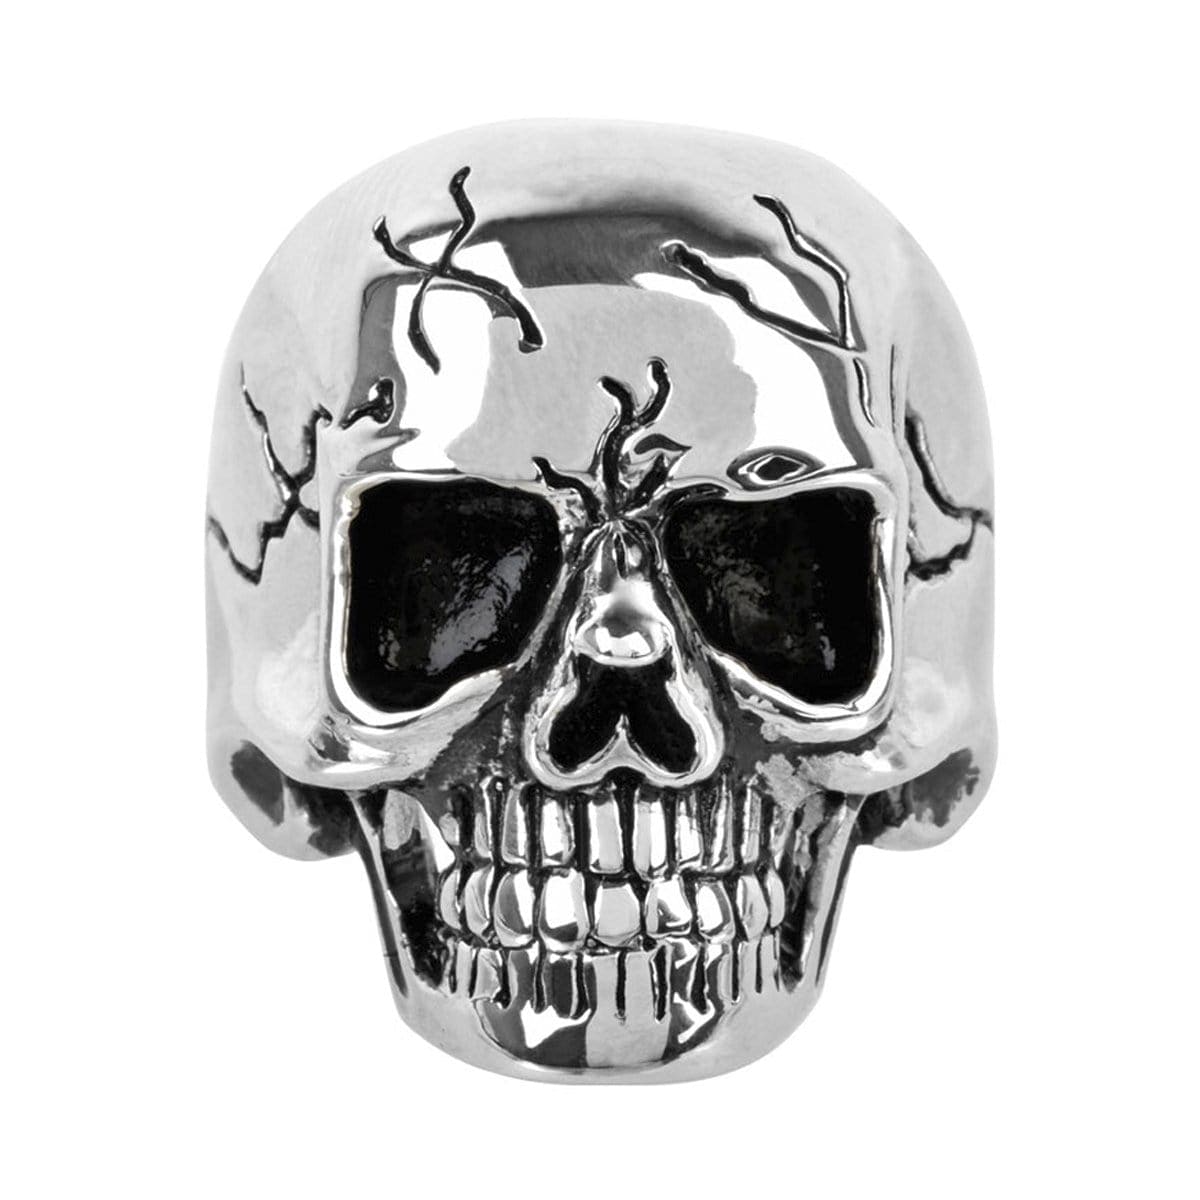 INOX JEWELRY Rings Silver Tone Stainless Steel Grinning Cracked Skull Ring FR1043-14